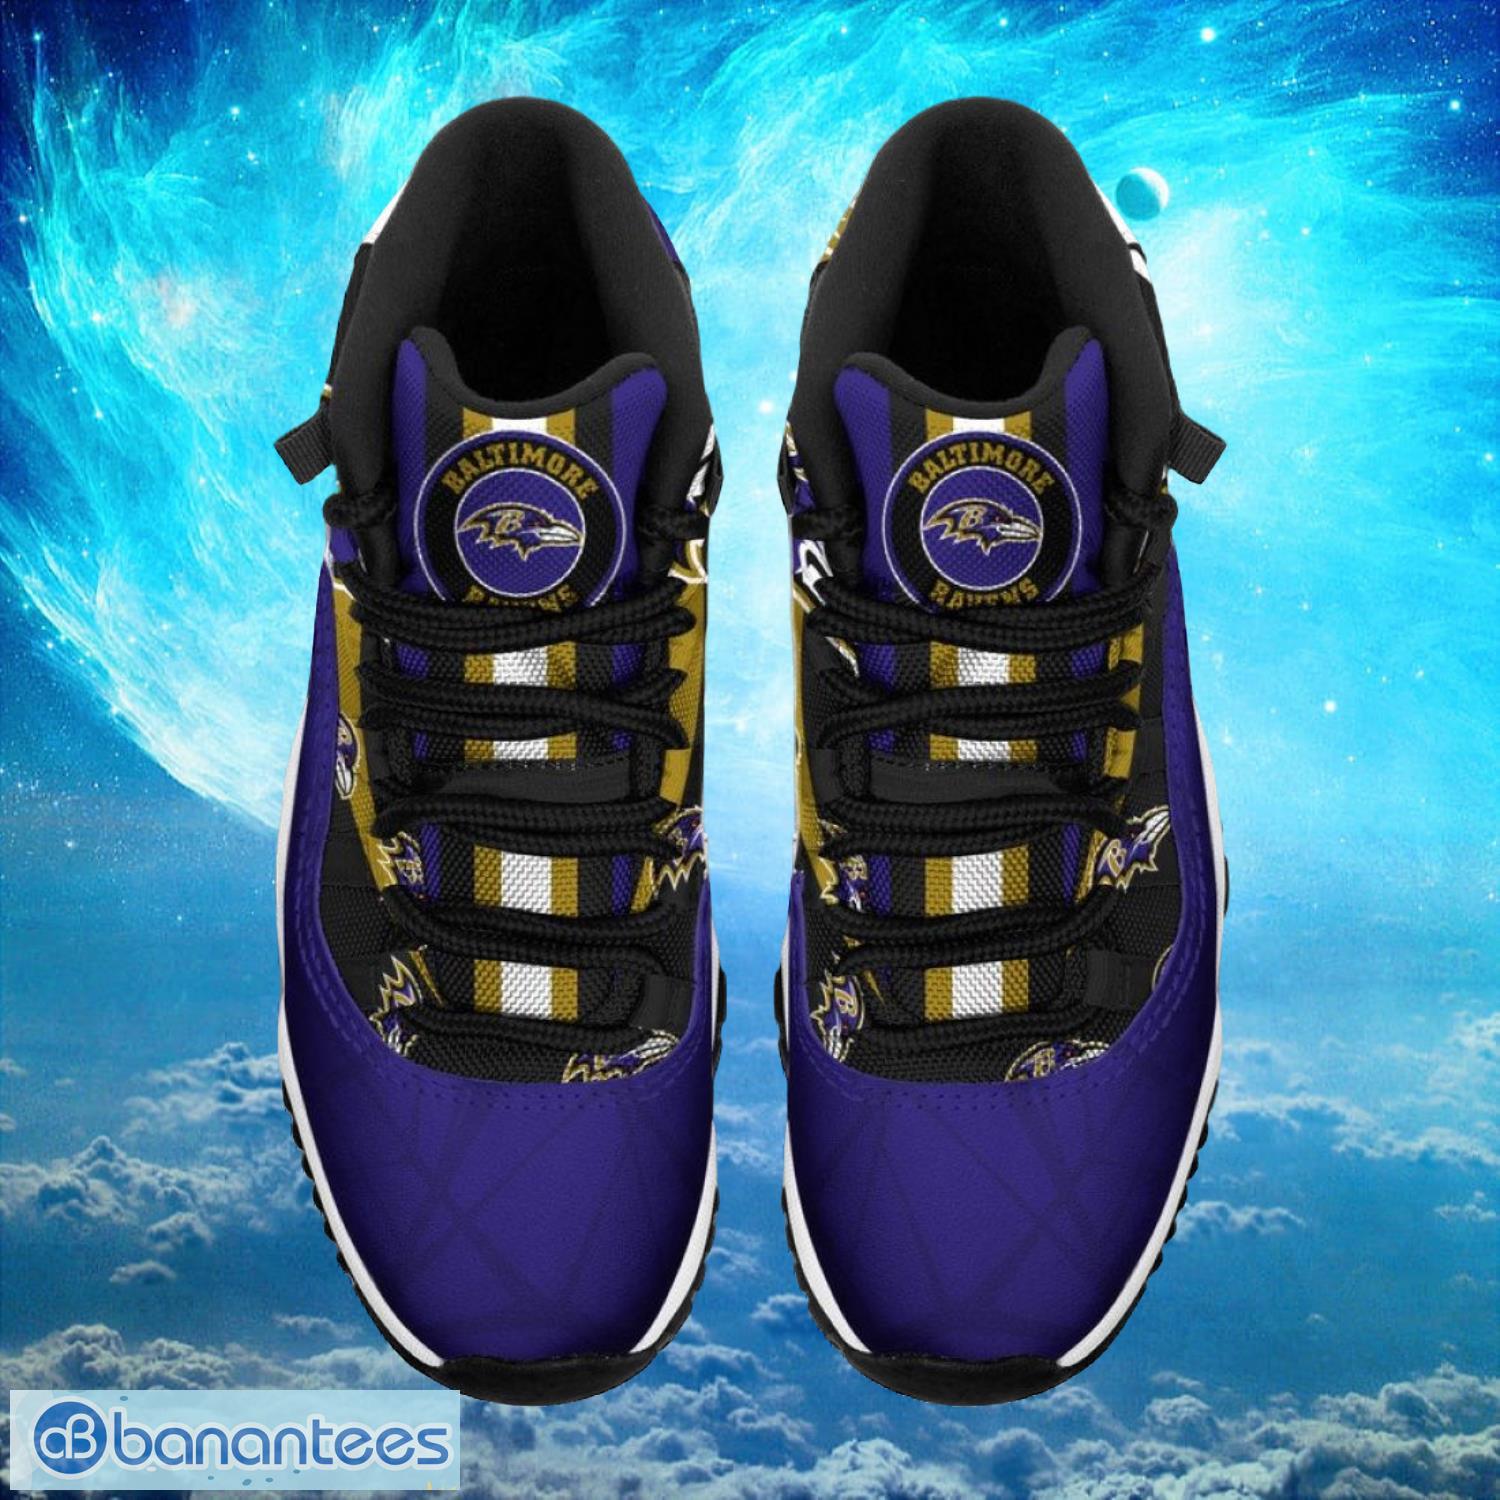 Baltimore Ravens NFL Air Jordan 11 Sneakers Shoes Gift For Fans Product Photo 2